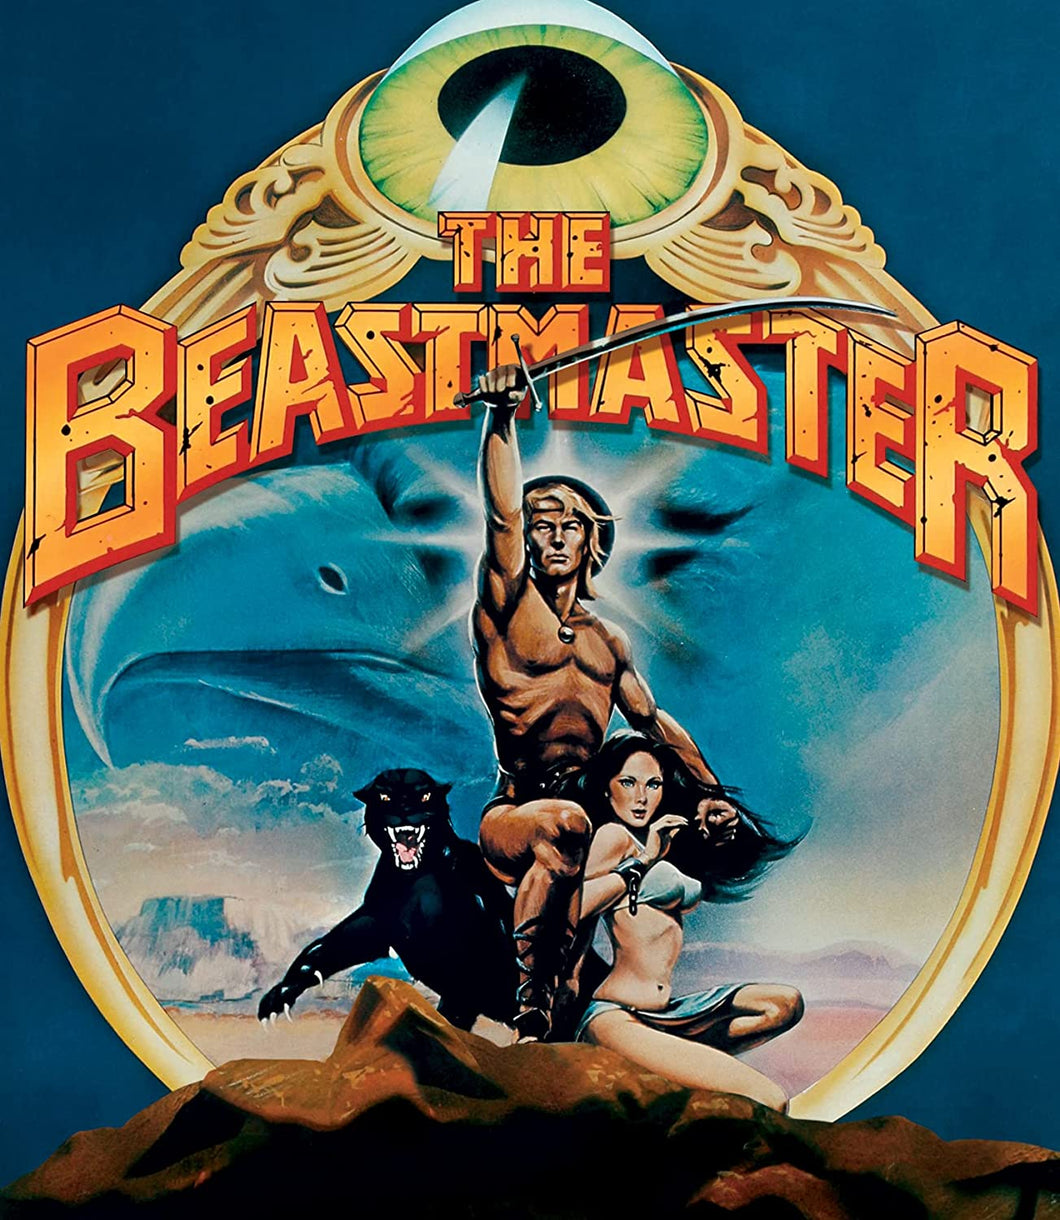 The Beastmaster 4K (1982) de Don Coscarelli - open product - front cover